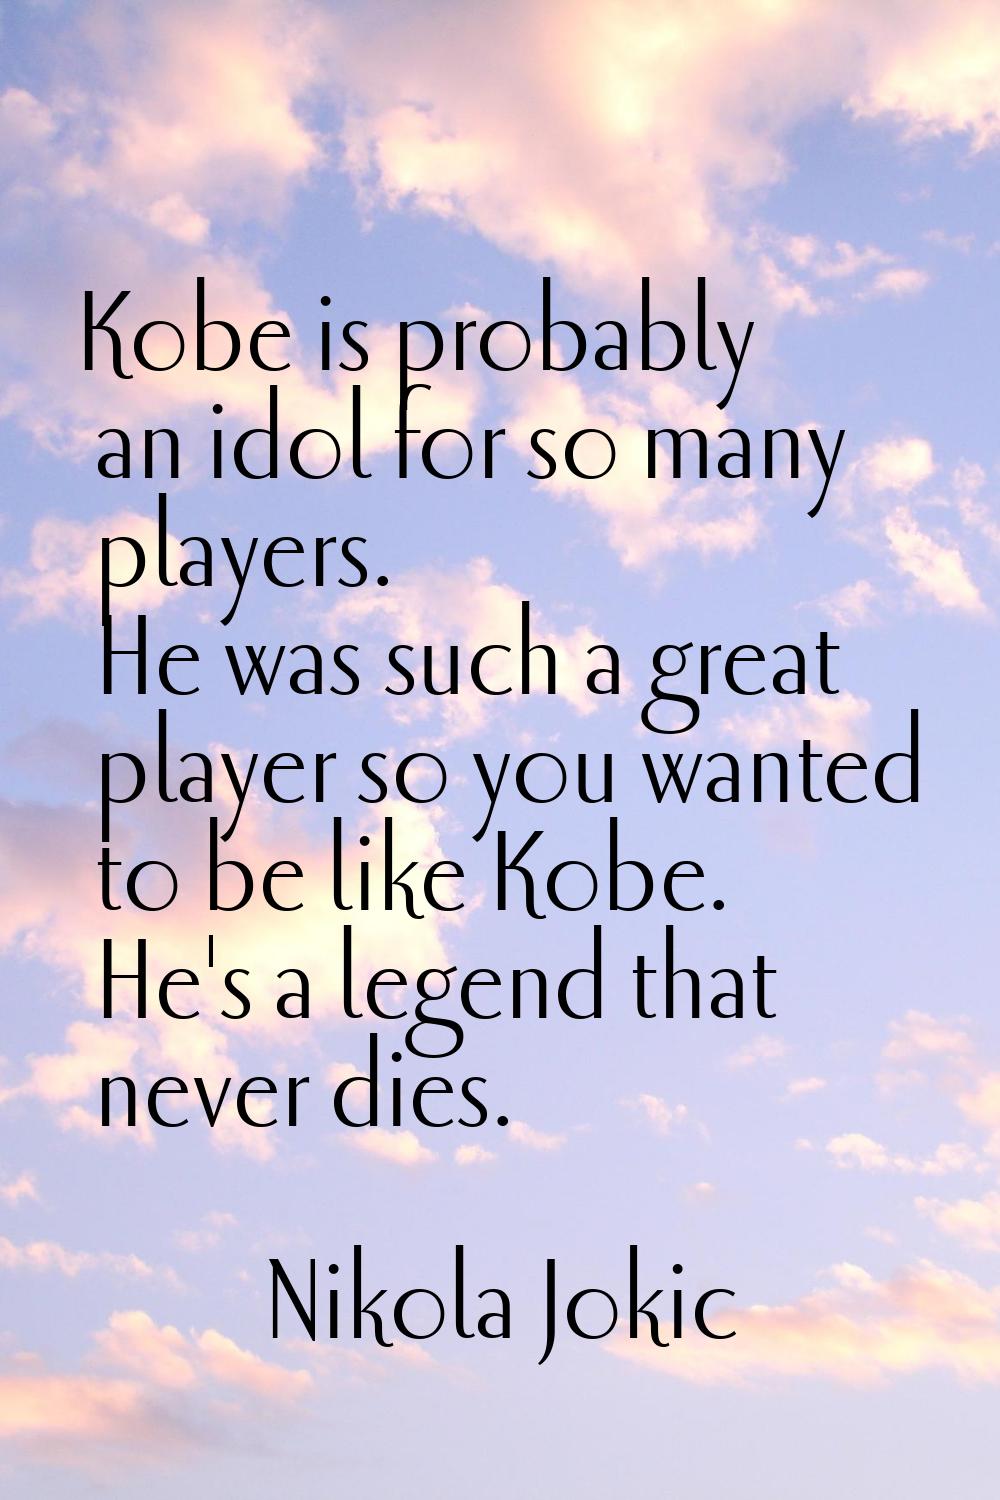 Kobe is probably an idol for so many players. He was such a great player so you wanted to be like K